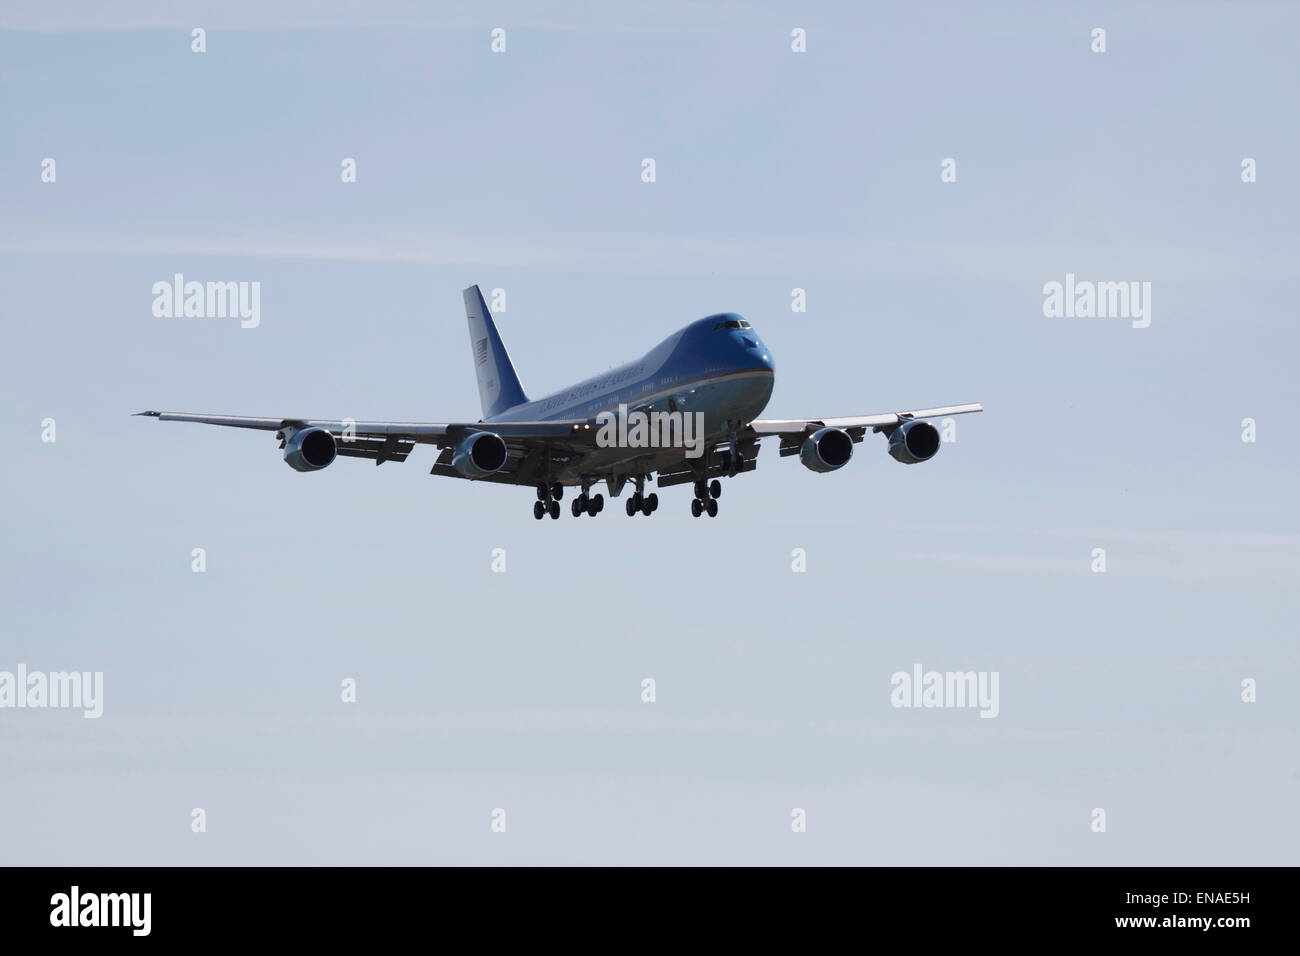 Air Force One mit Präsident Obama landet bei Pease International Tradeport in New Hampshire. Stockfoto